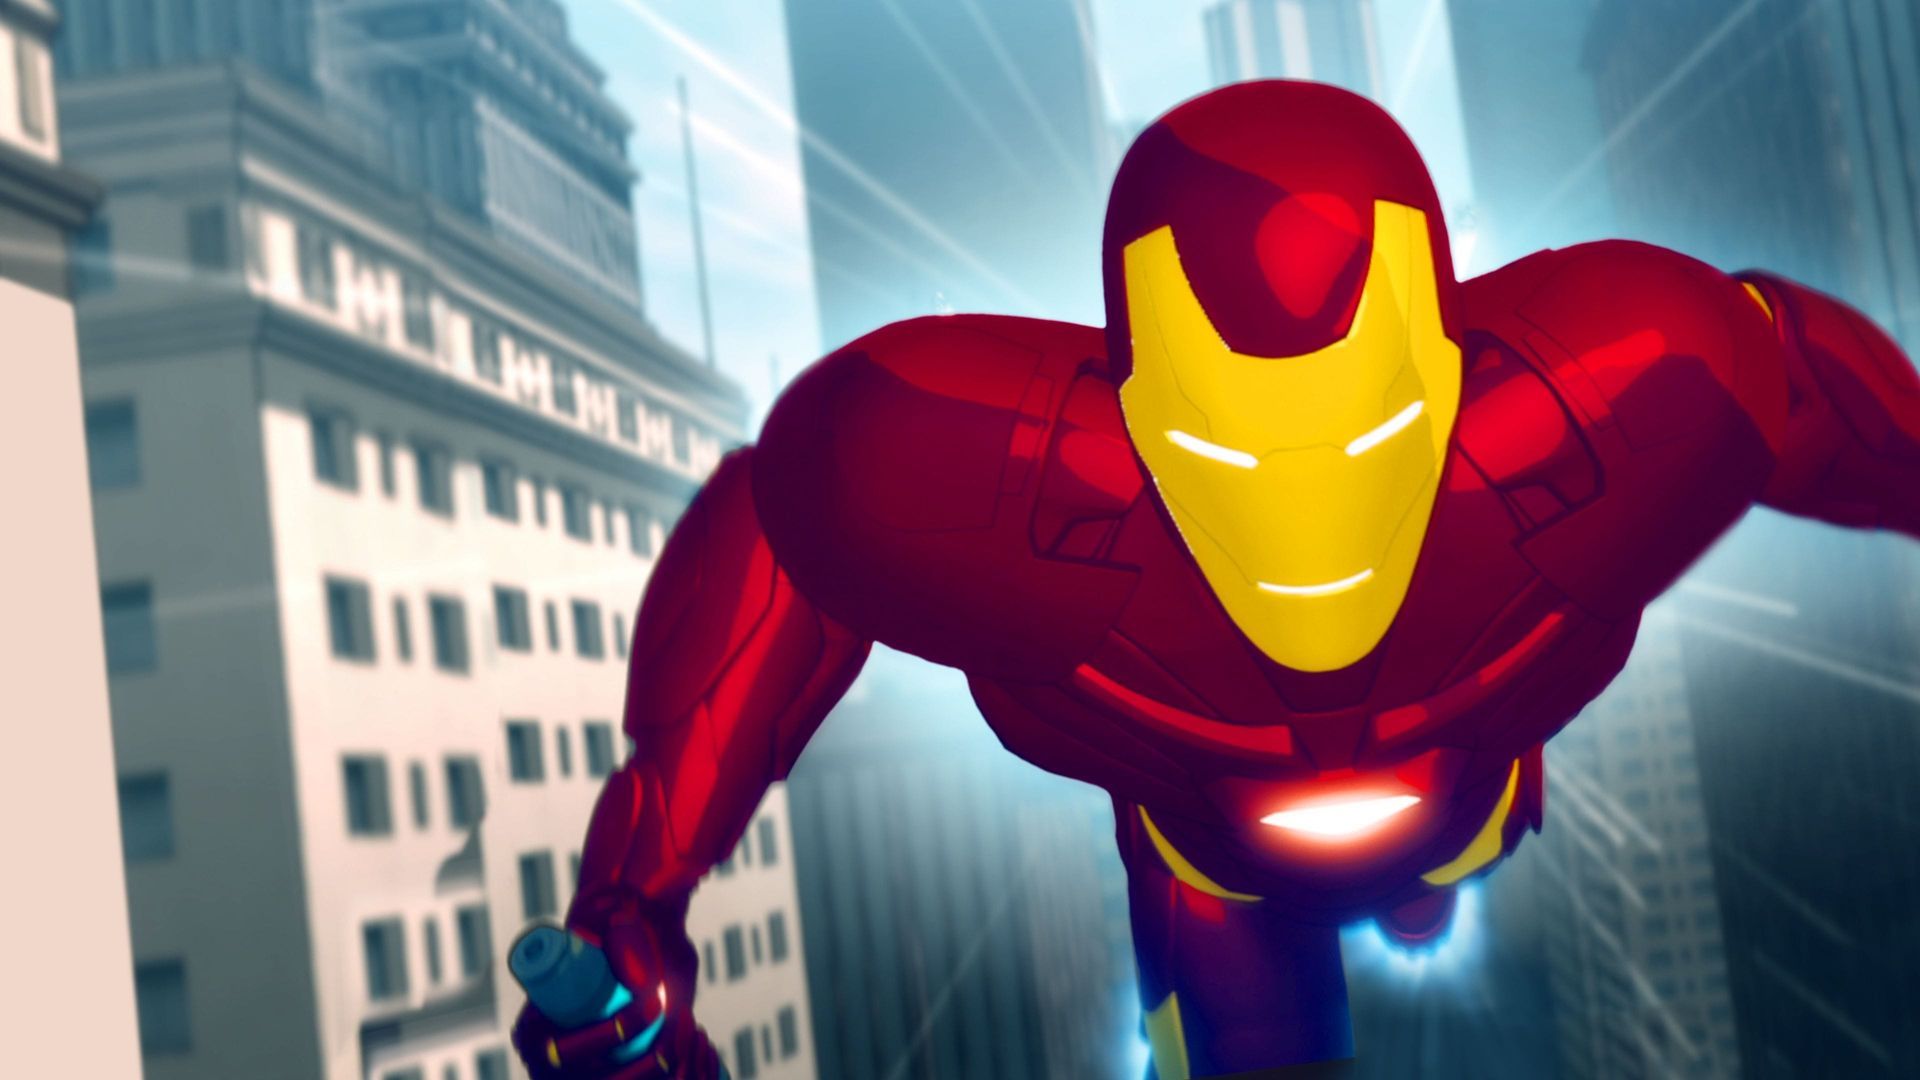 Iron Man: Armored Adventures Episodes on Netflix, Disney+, and Streaming Online